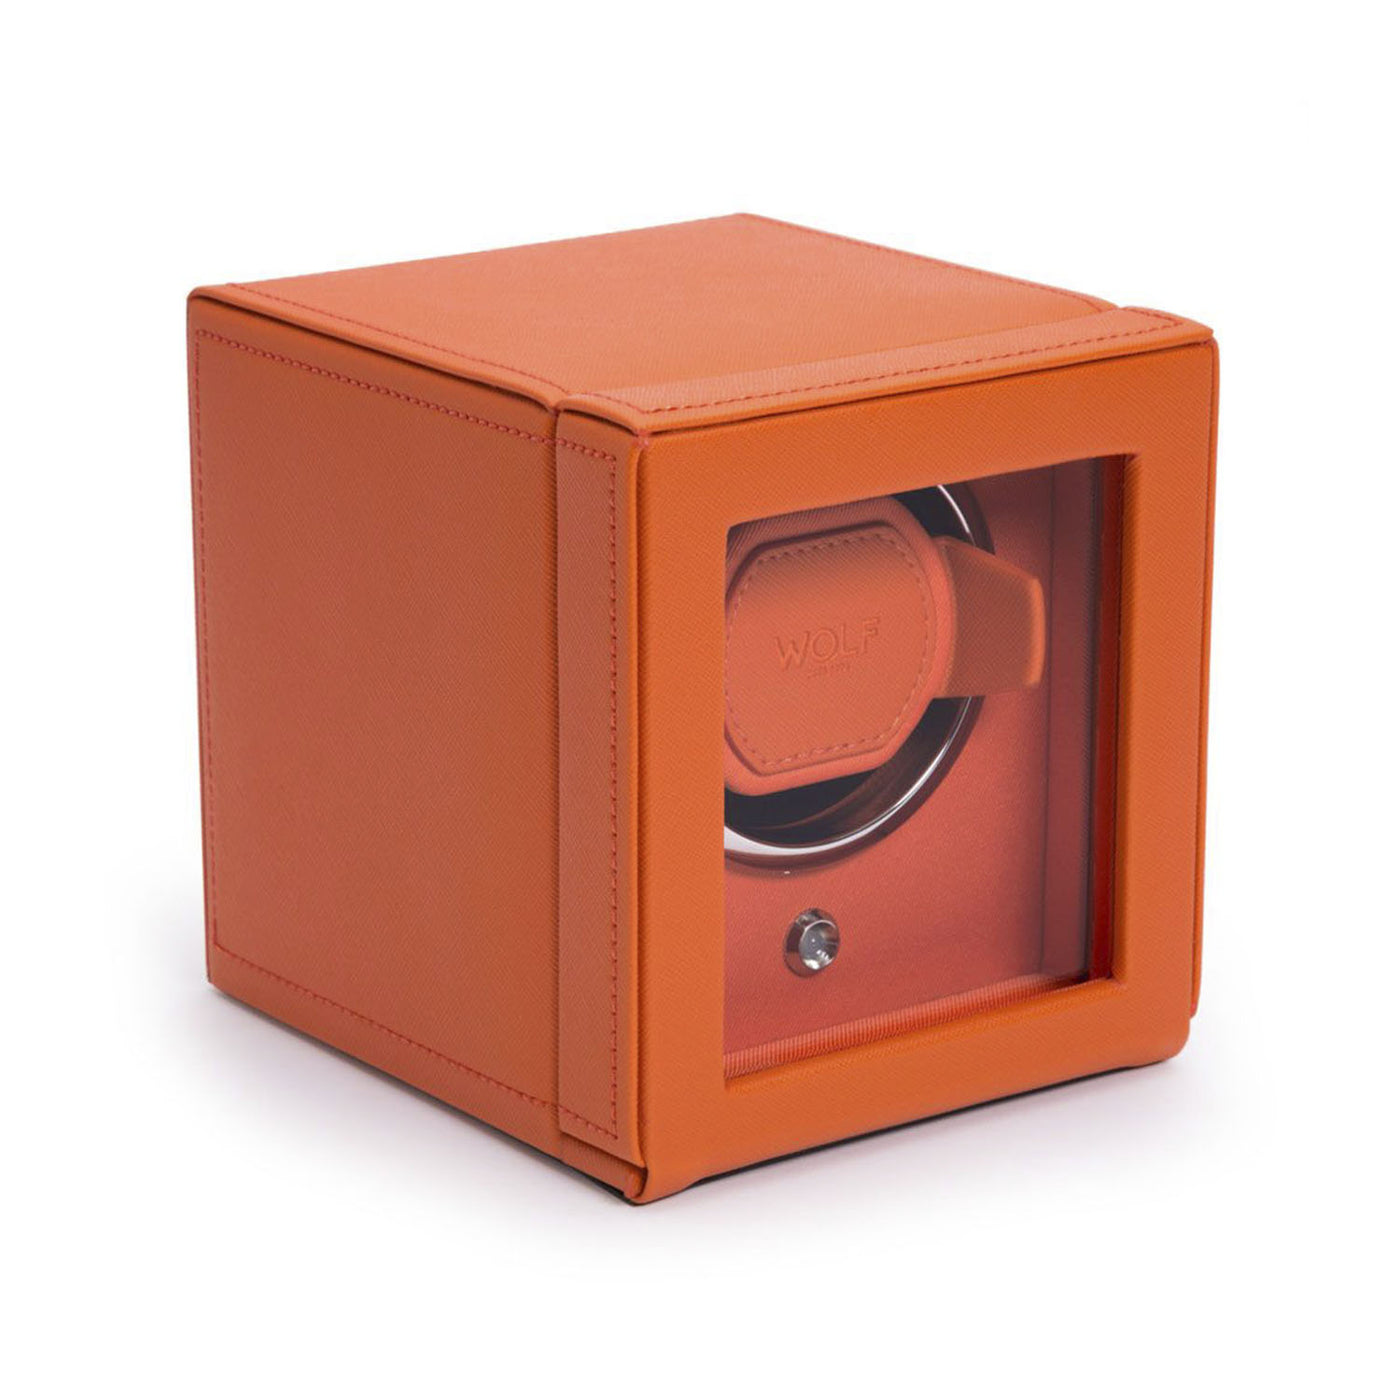 Wolf 1834 Cub Single Watch Winder with cover – 461139